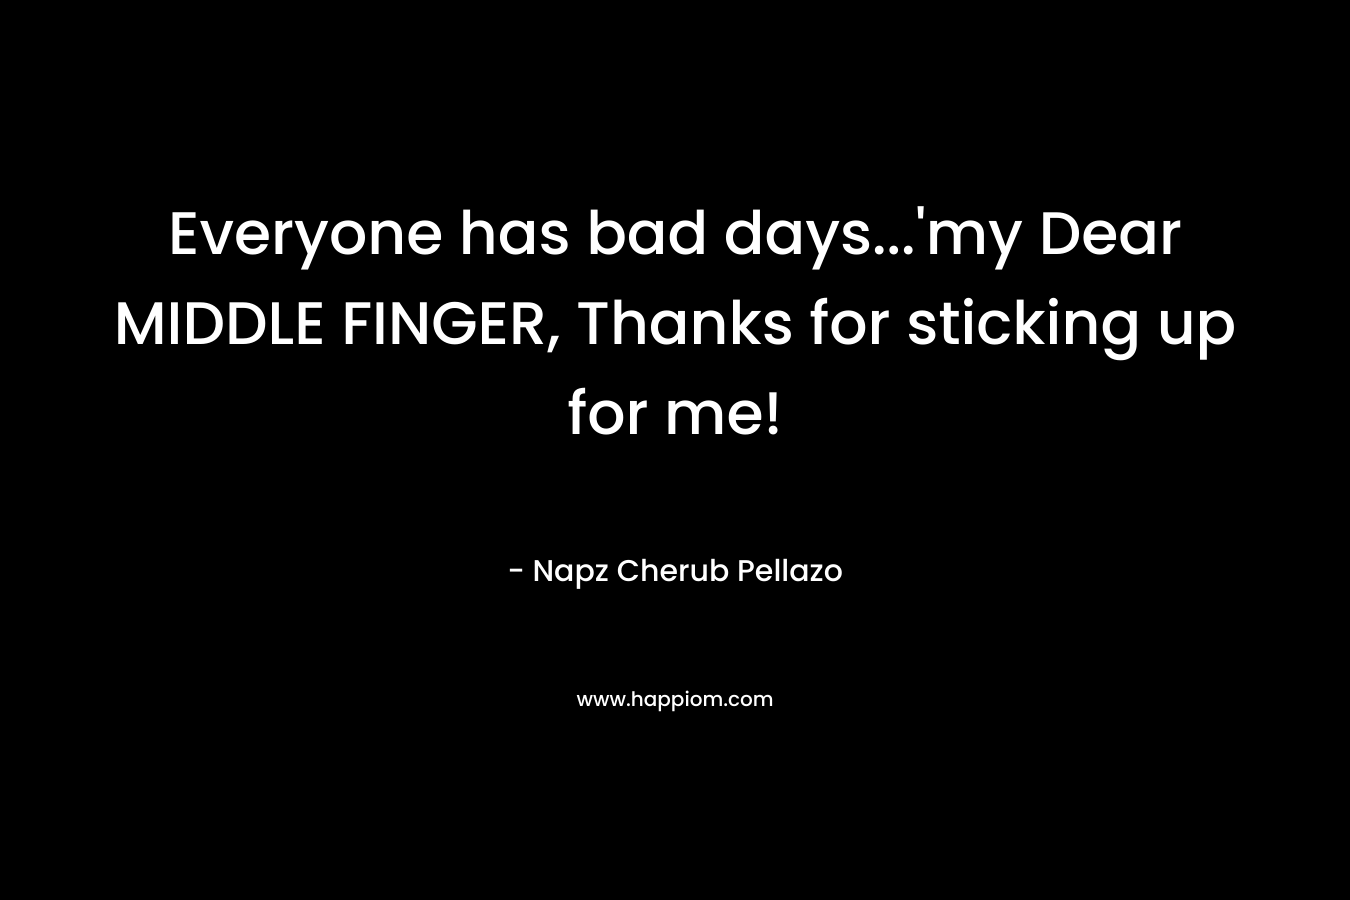 Everyone has bad days...'my Dear MIDDLE FINGER, Thanks for sticking up for me!